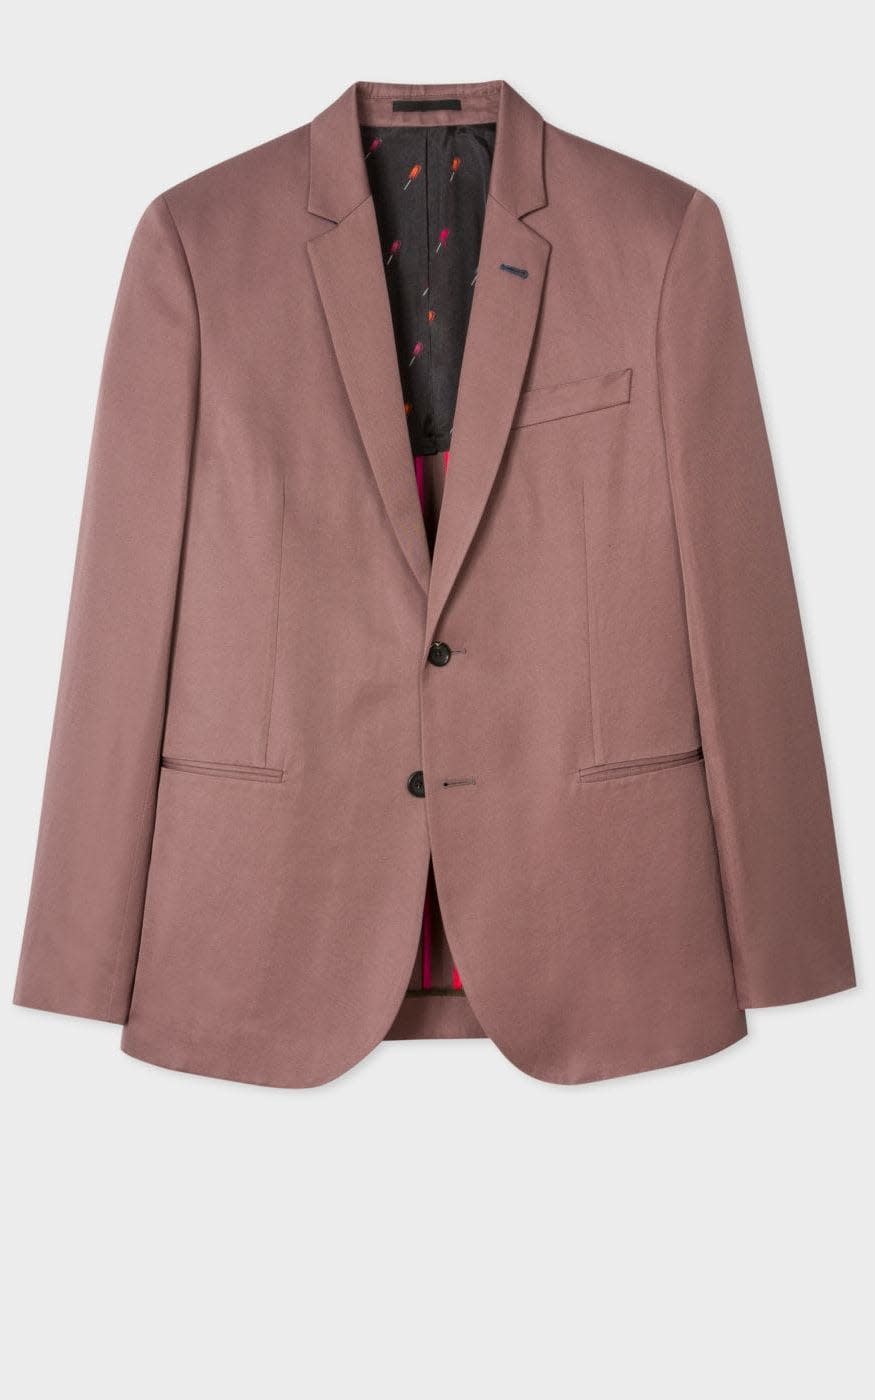 A coloured blazer is a subtle update on a classic; cotton and linen blazer, £188, Paul Smith